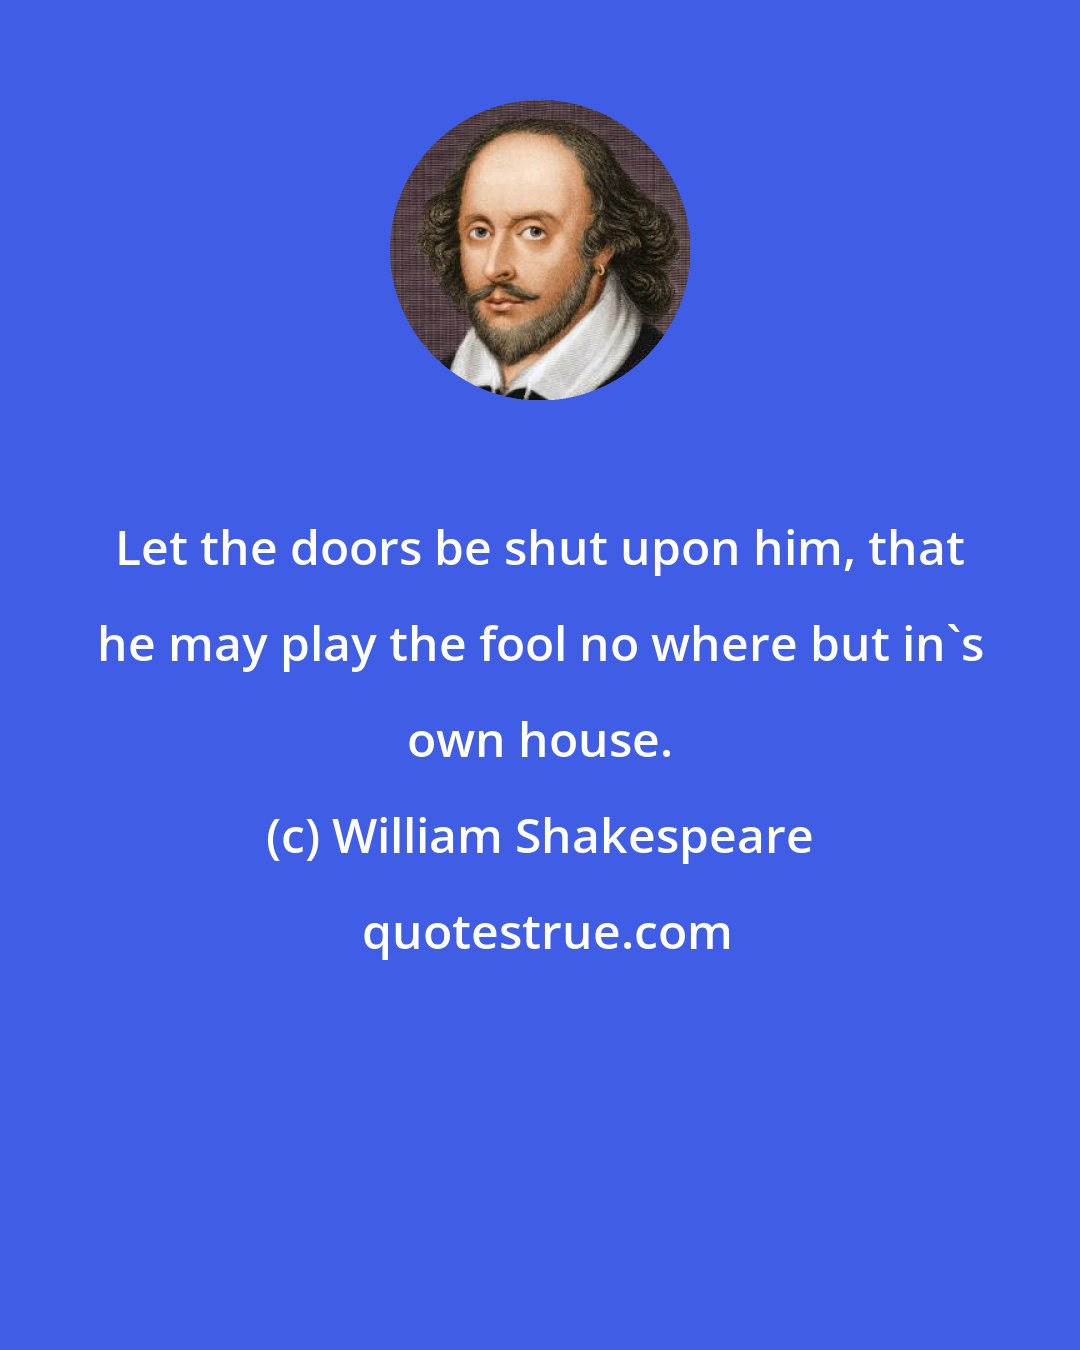 William Shakespeare: Let the doors be shut upon him, that he may play the fool no where but in's own house.